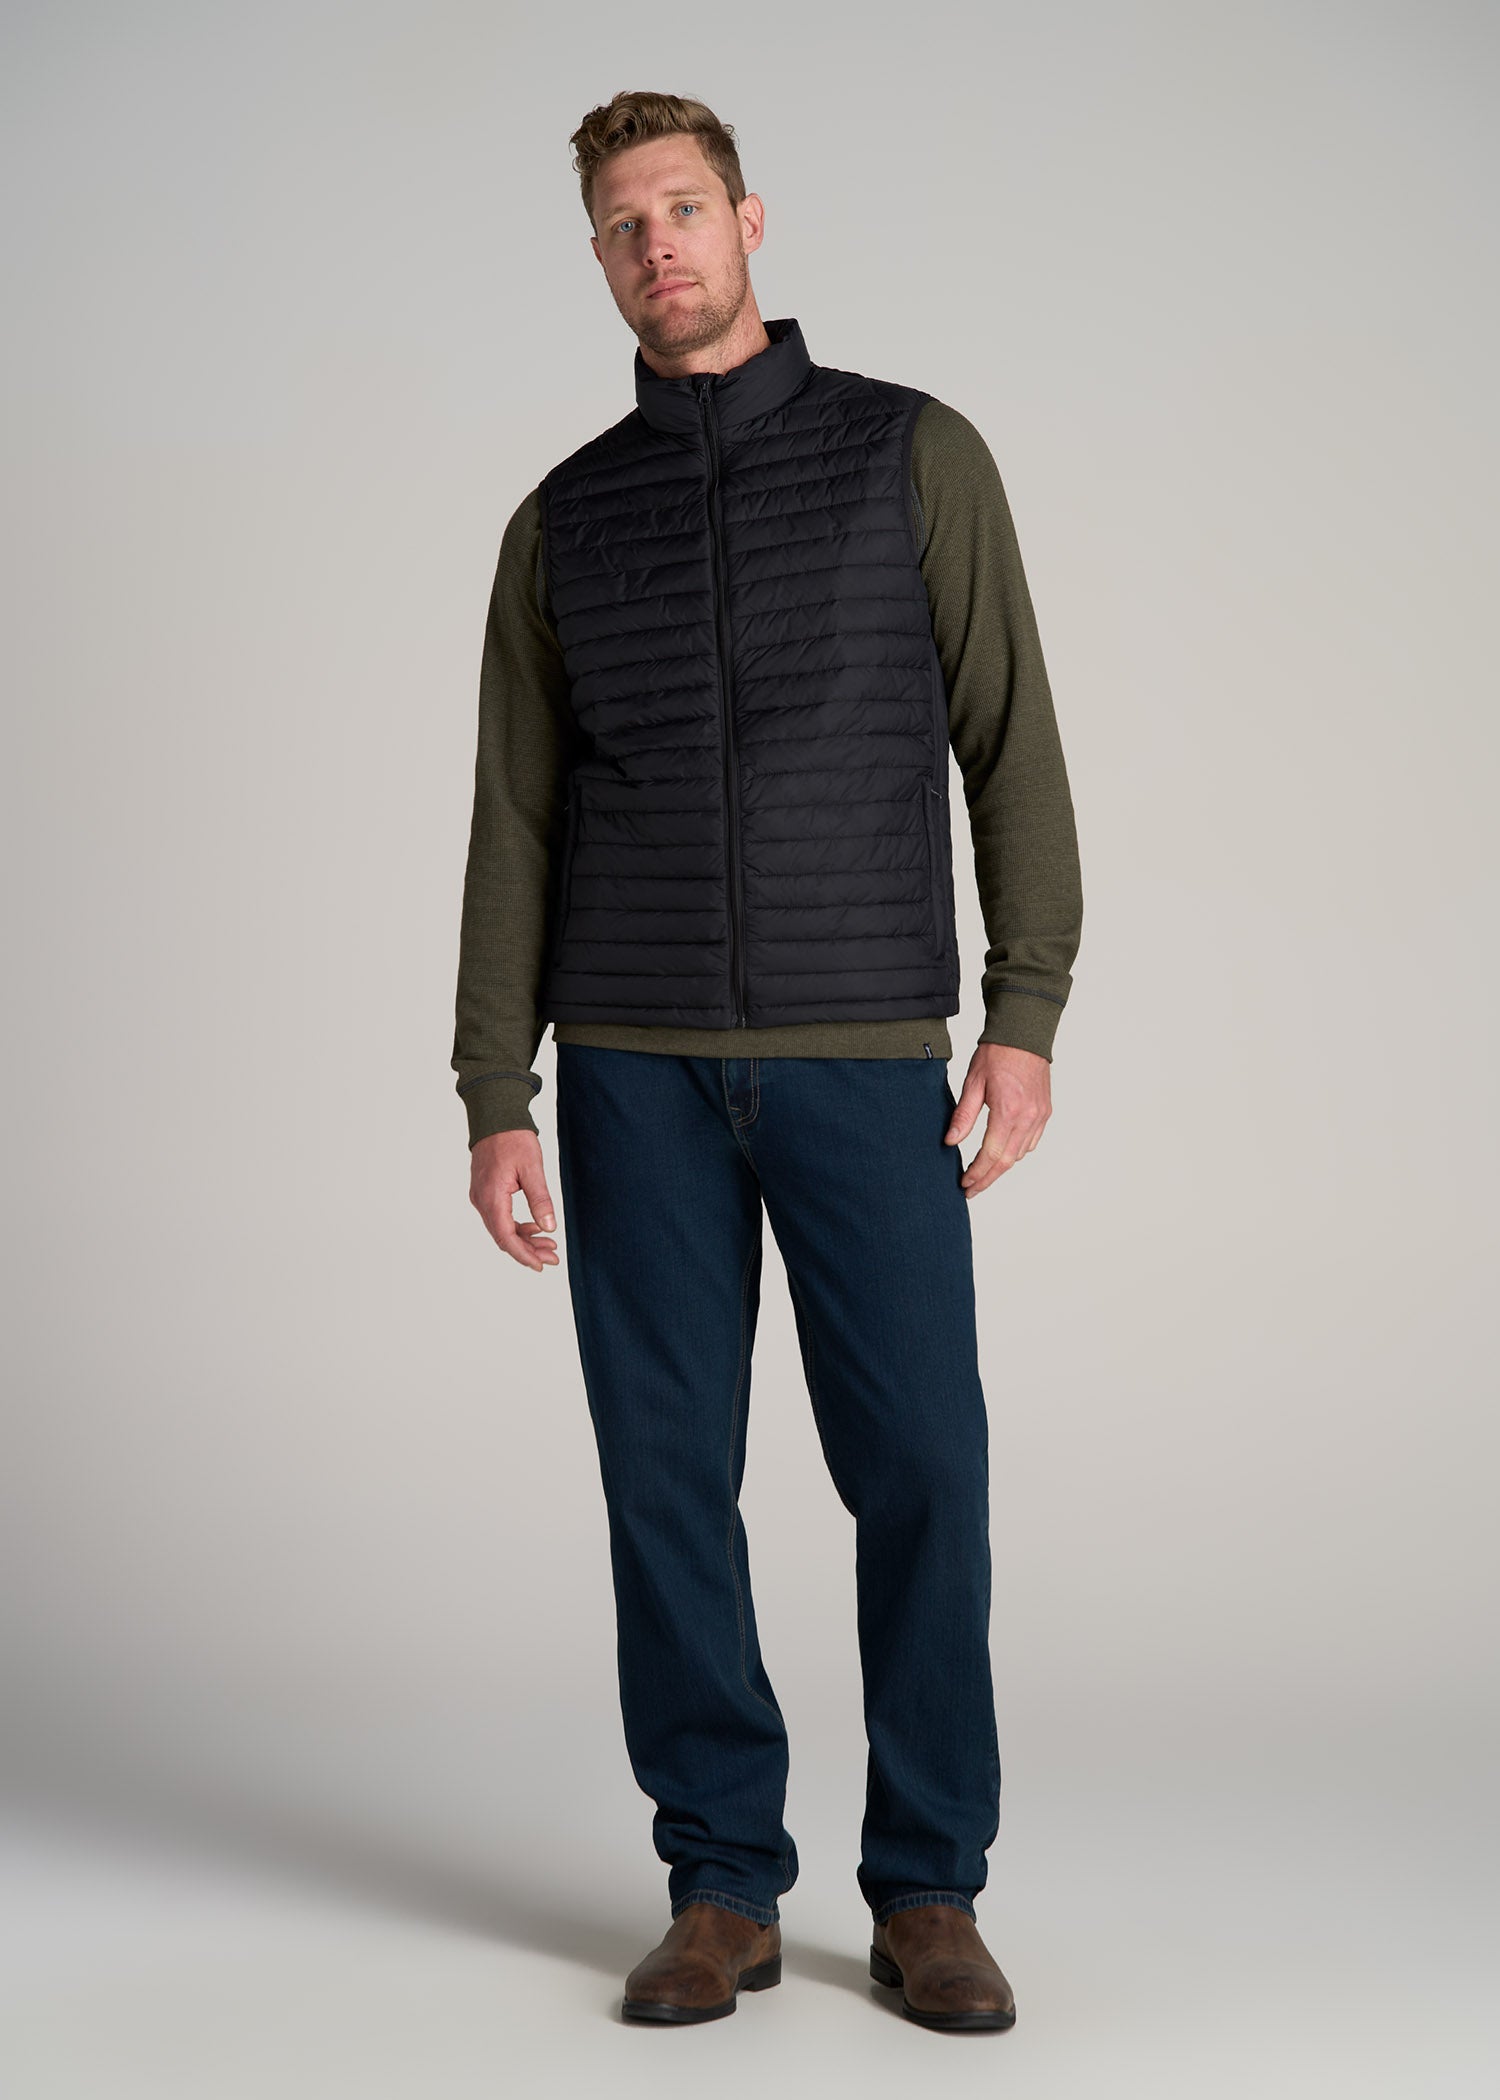 Tall Men's Packable Puffer Vest in Olive Space Dye